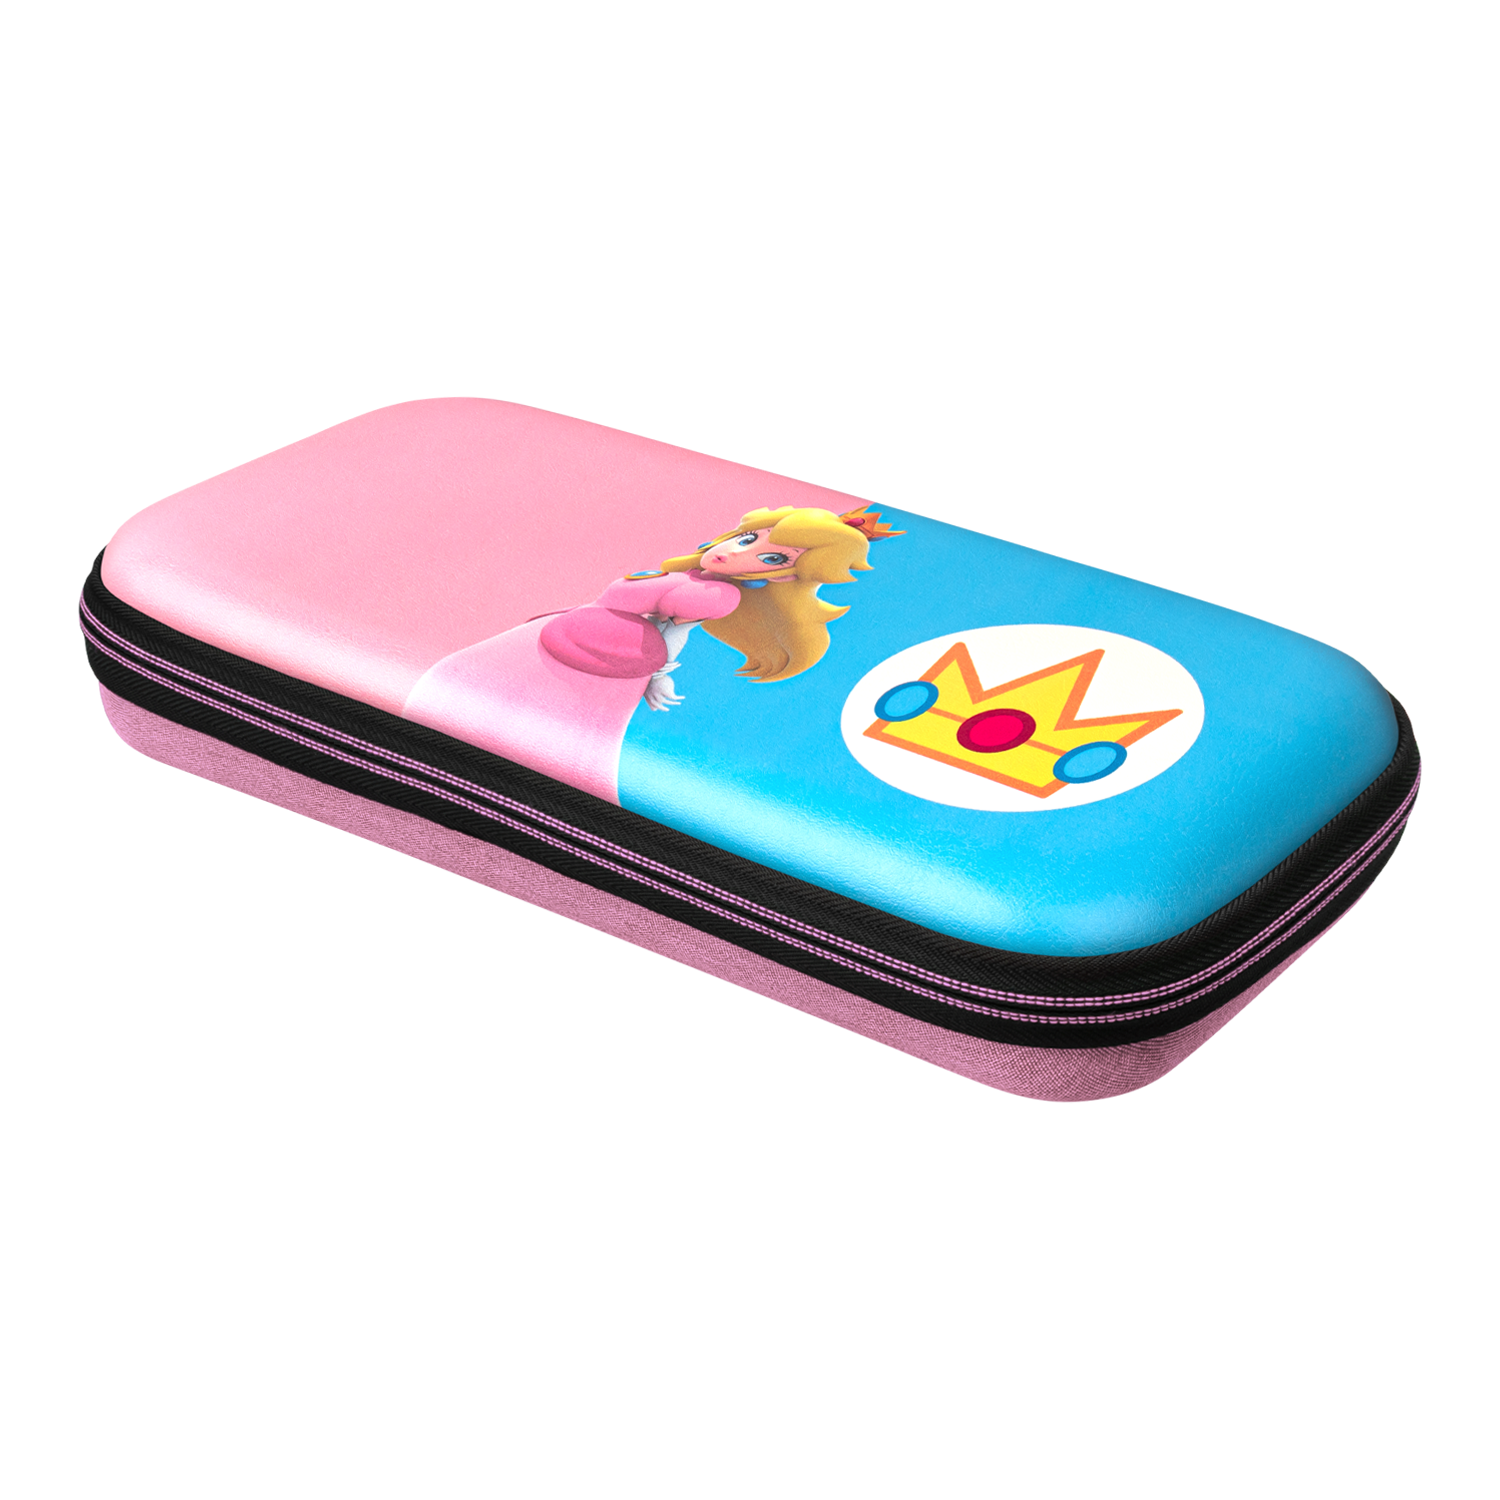 PDP Slim Deluxe Travel Case for Nintendo Switch - Royal Princess Peach